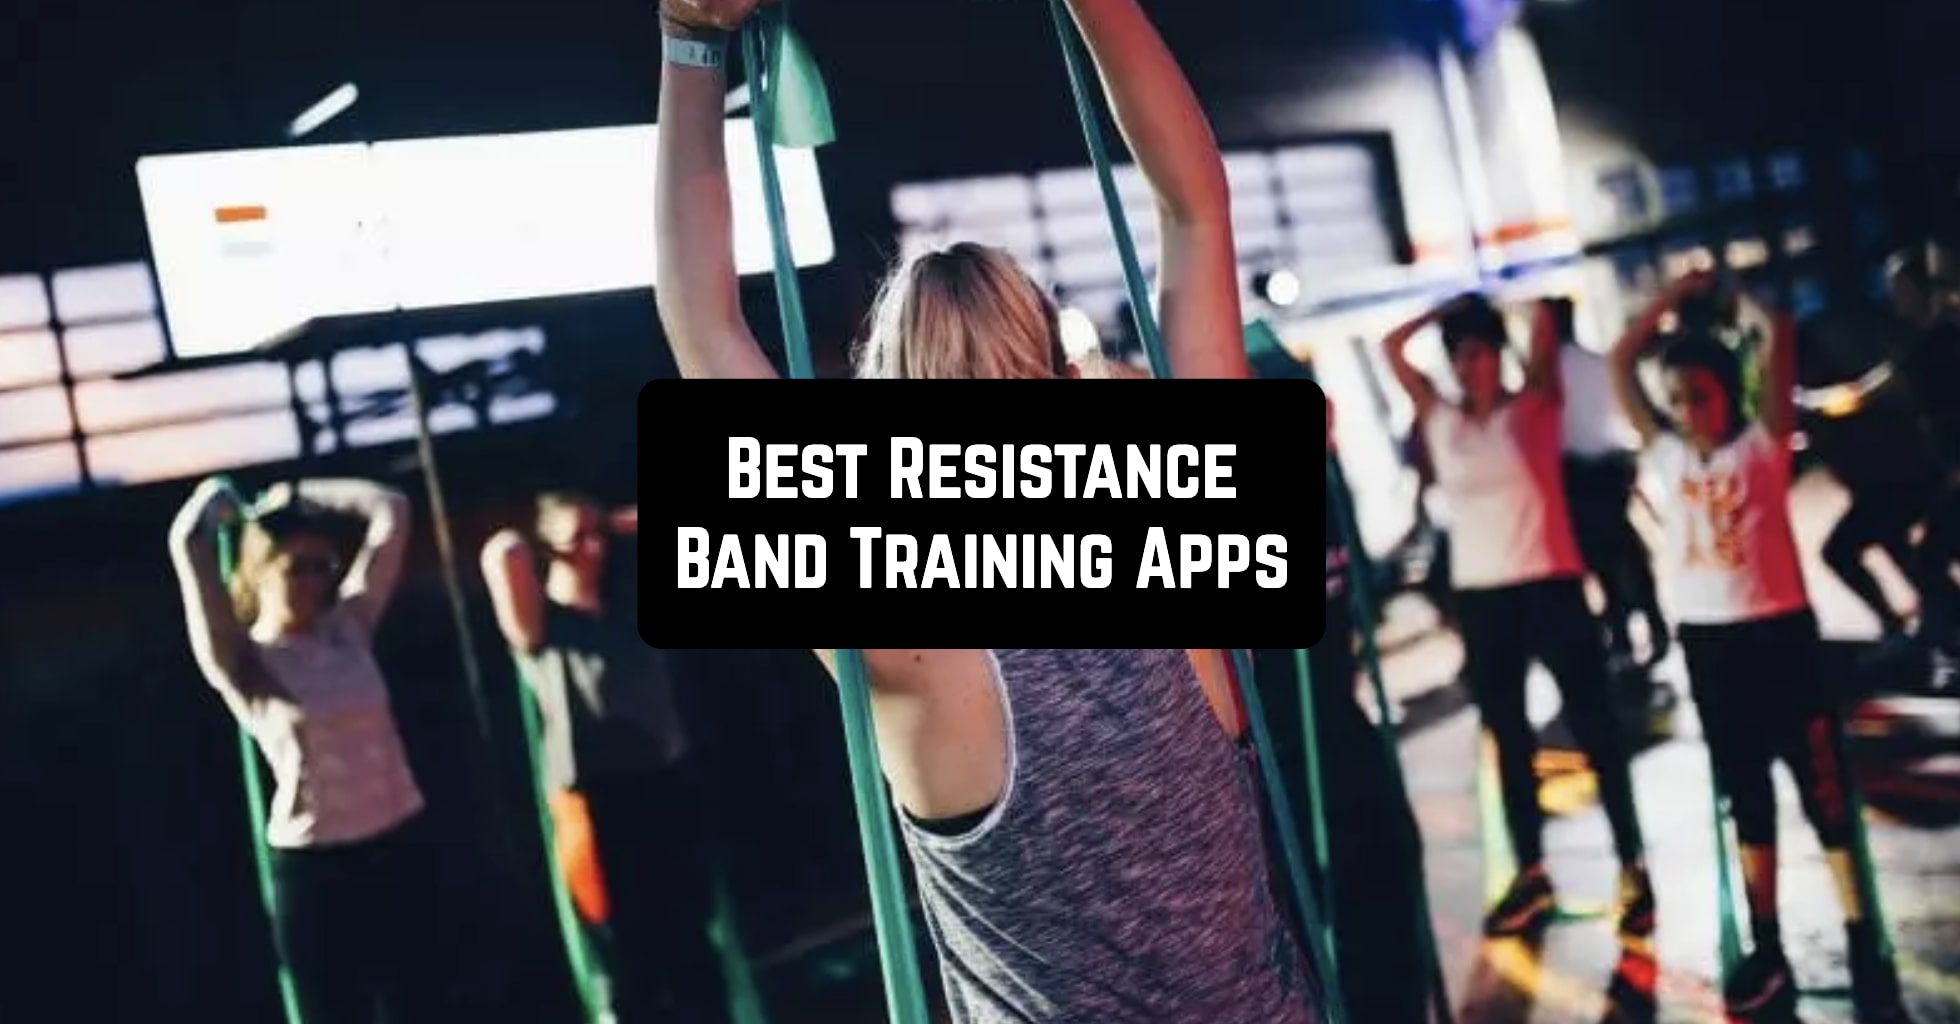 7 Best Resistance Band Training Apps for Android and iOS